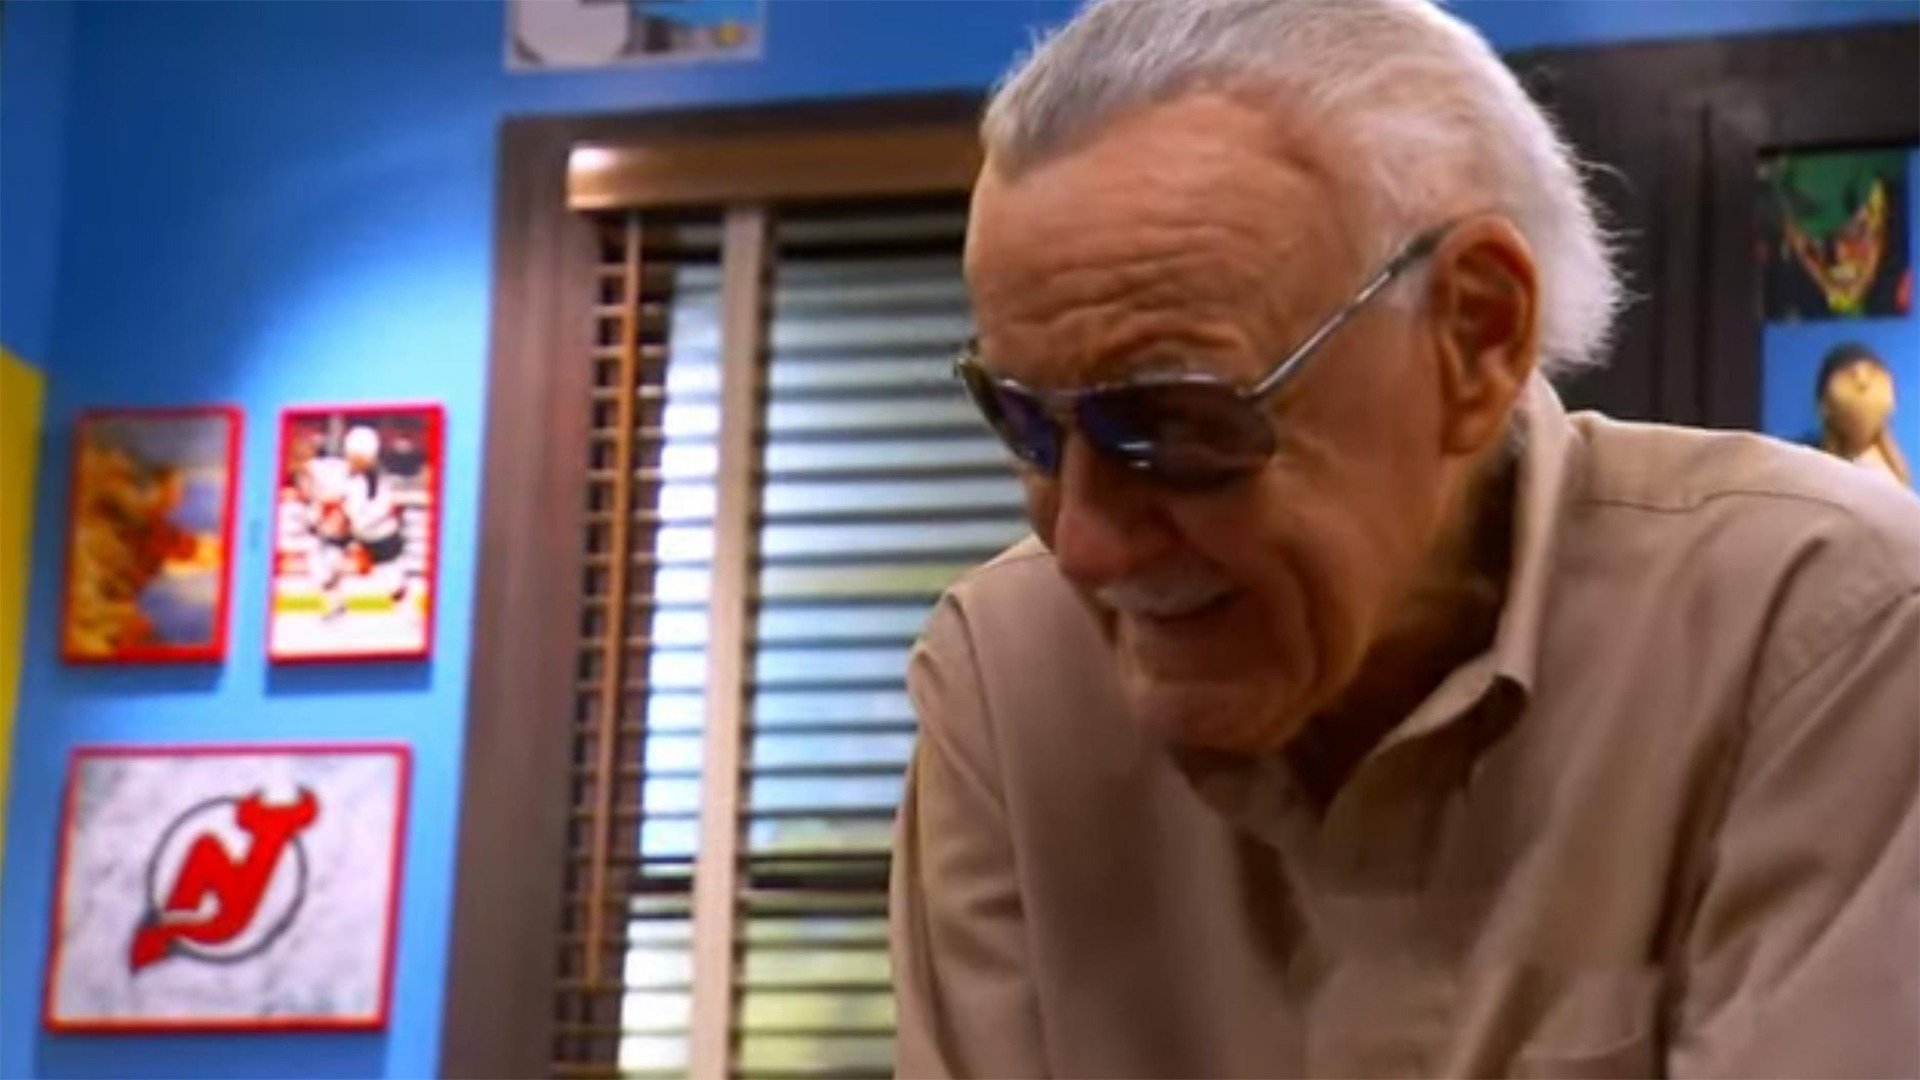 Stan the Man, Stan Lee visits the shop for a photo op., TV-PG, Season 1002295, Episode 8